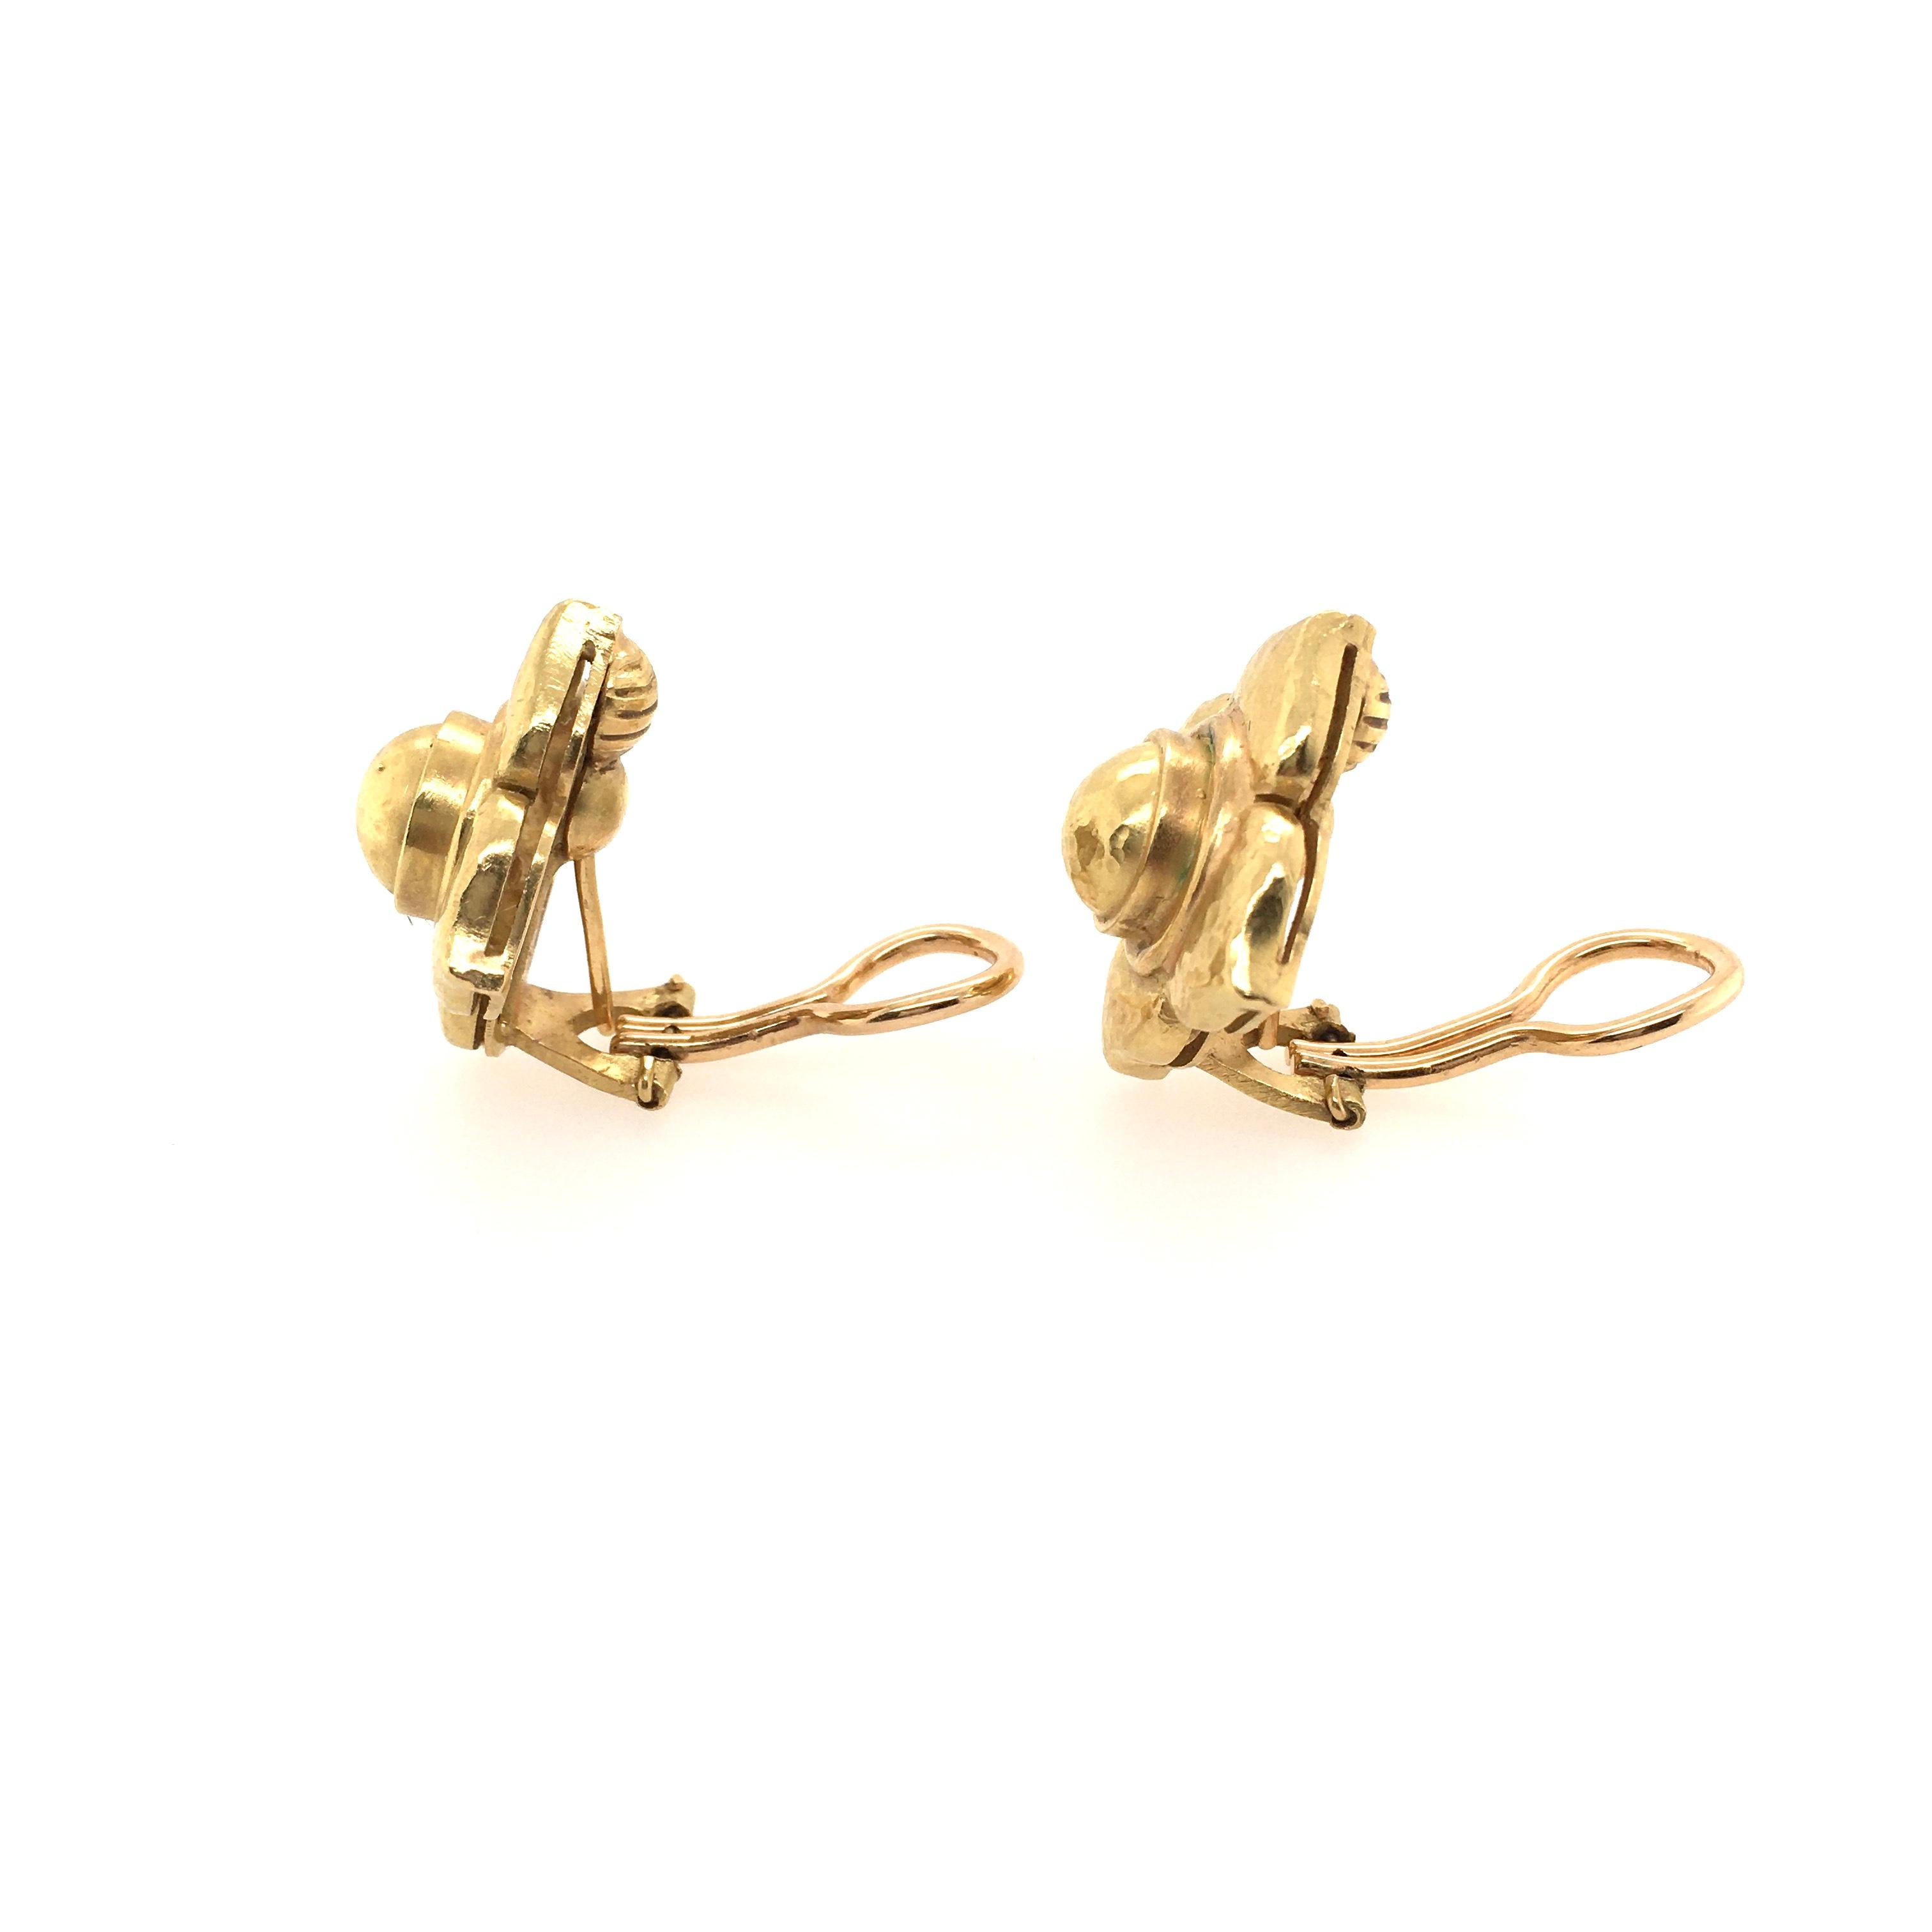 A pair of 18 karat yellow gold earrings. Elizabeth Locke. Circa 2000. Designed as a hammered gold flower. Length is approximately 1 inch, gross weight is approximately 19.4 grams. With maker’s mark. 